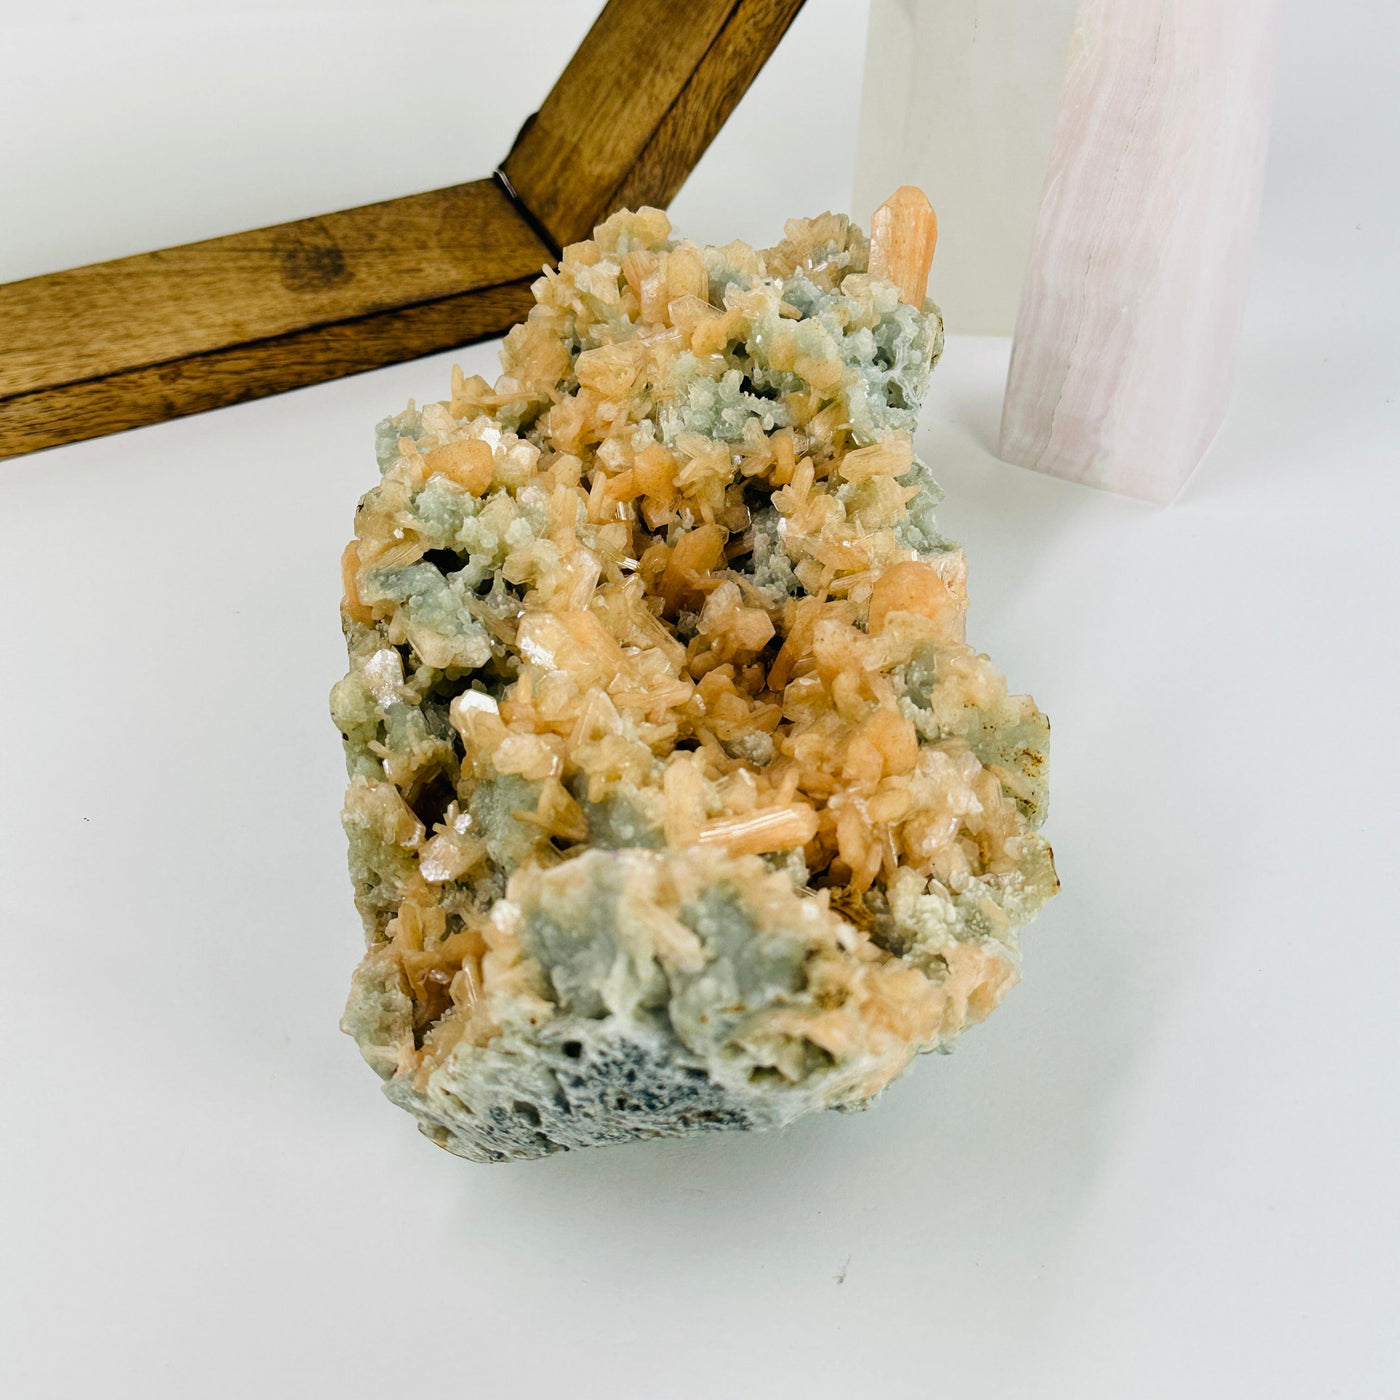 green apophyllite with peach stilbite with decorations in the background